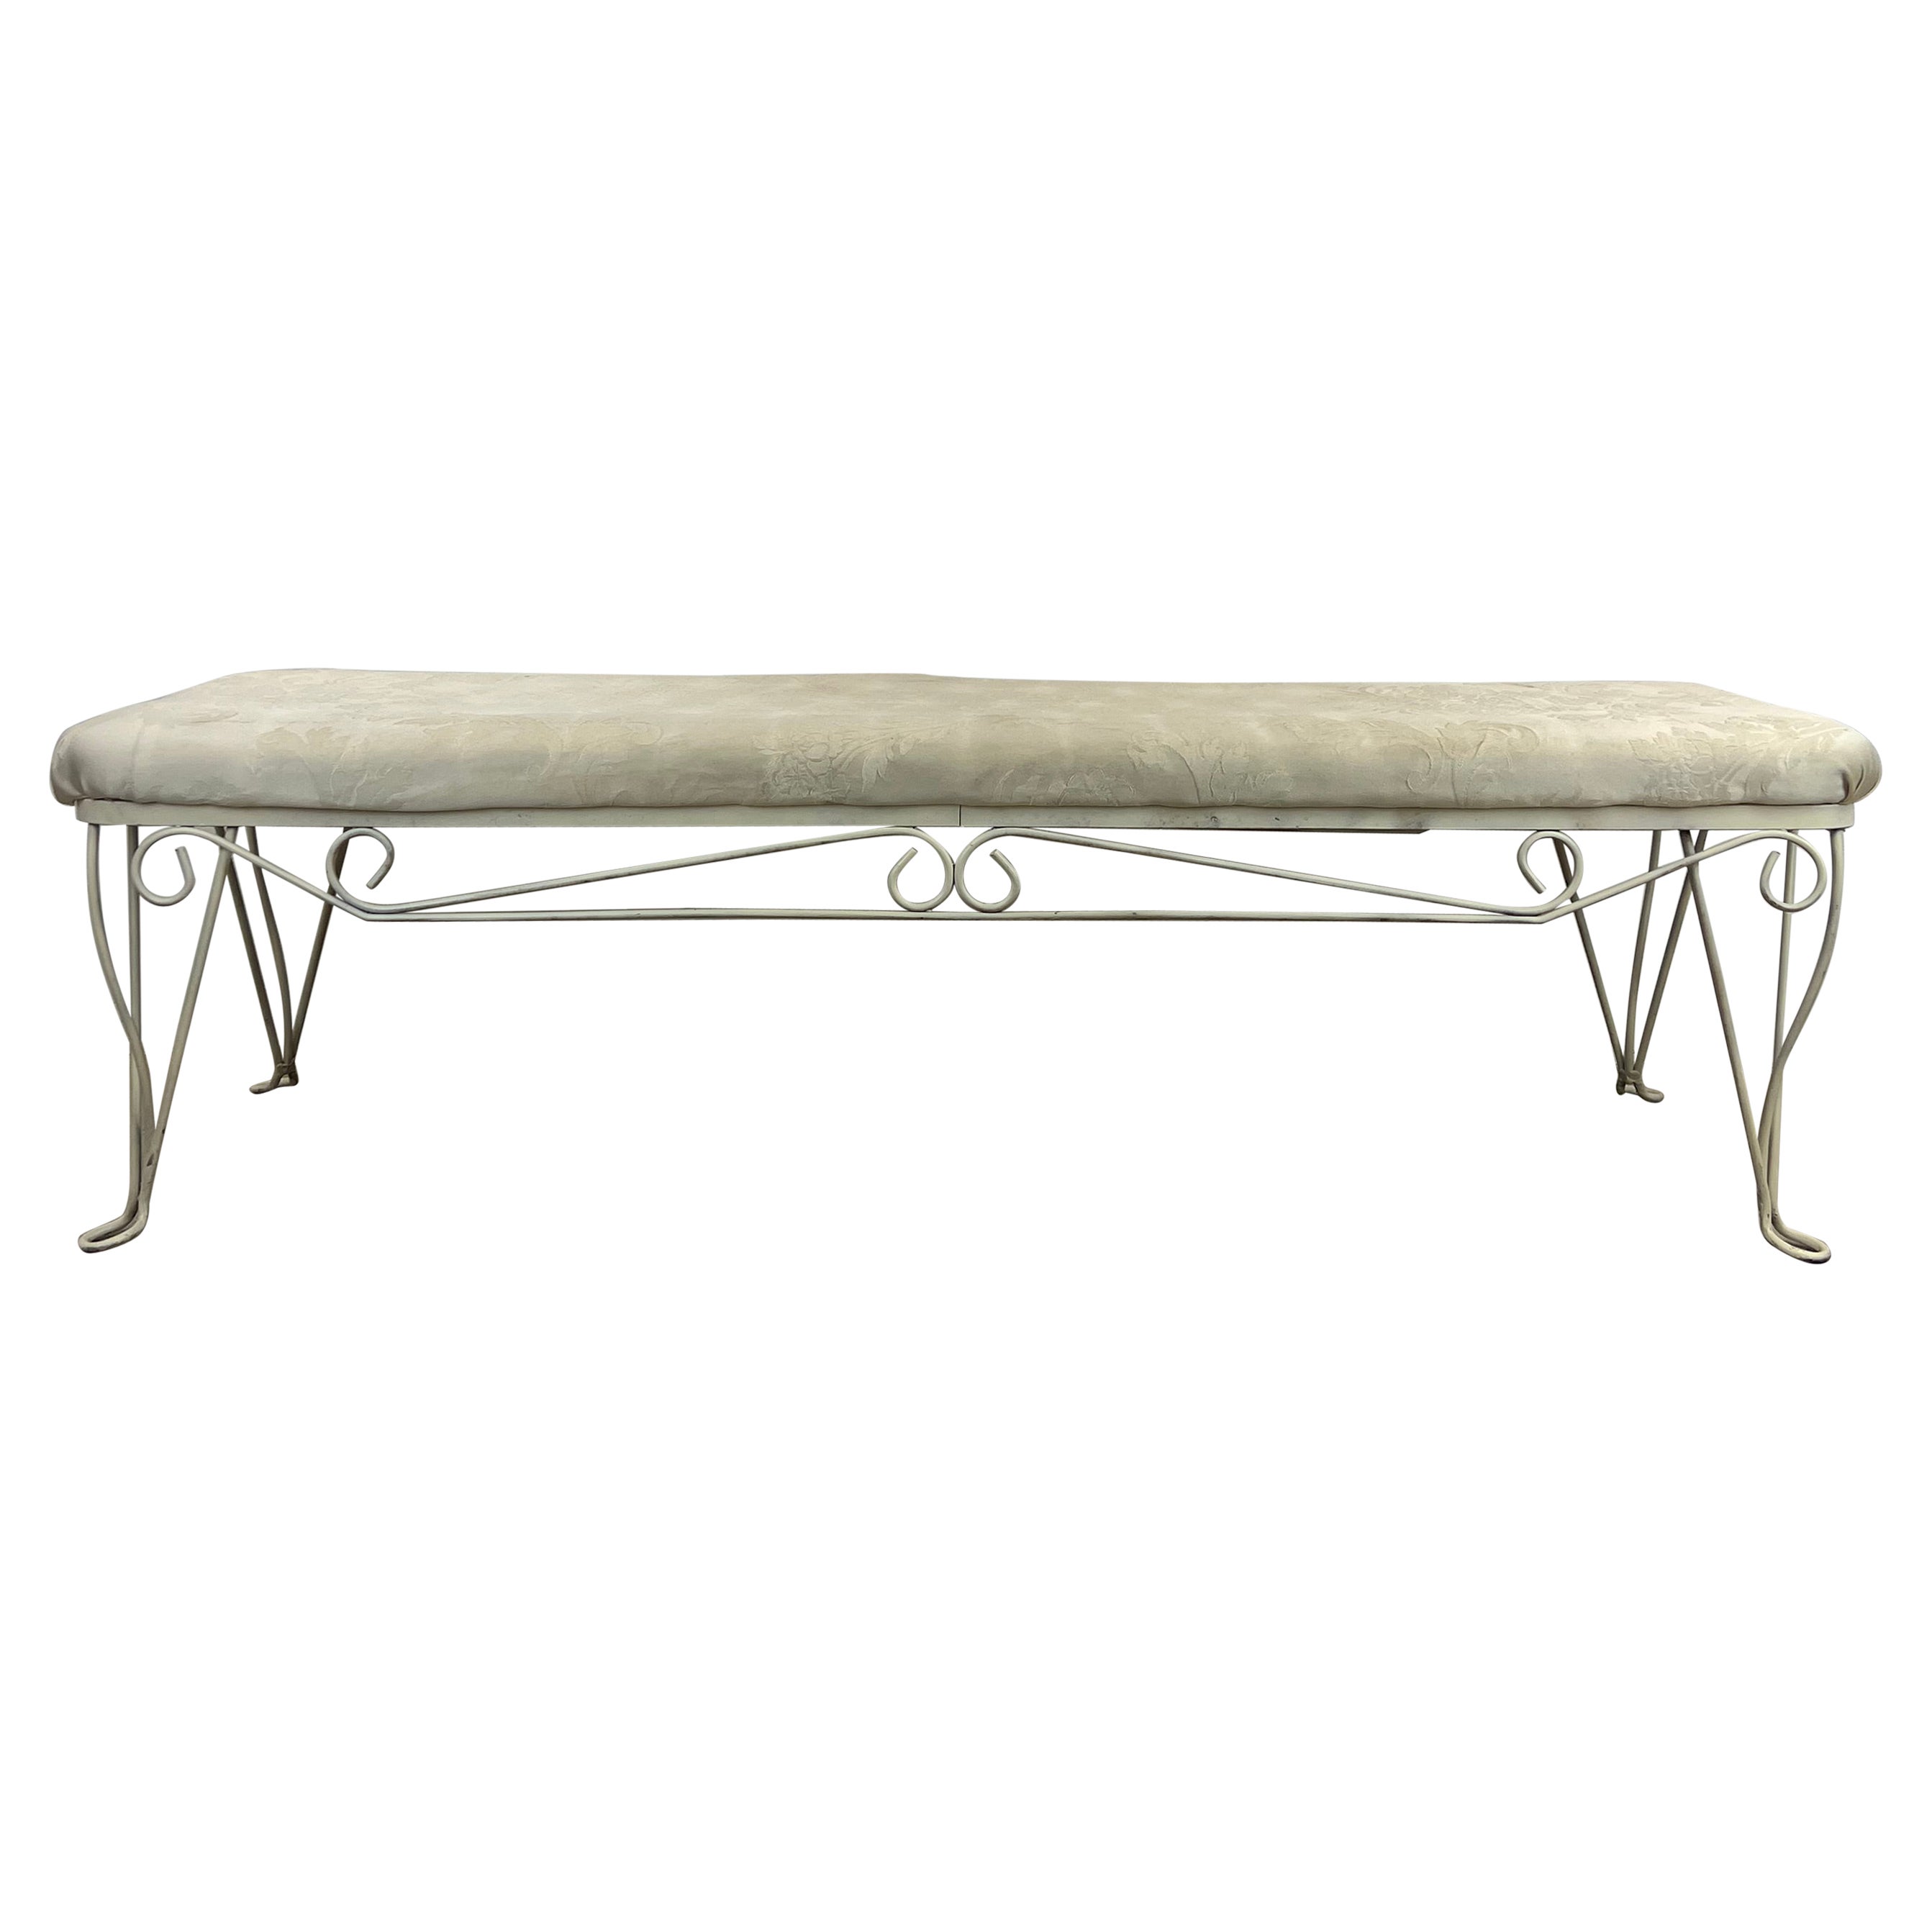 Hollywood Regency Style Upholstered Bench with Wrought Iron Frame